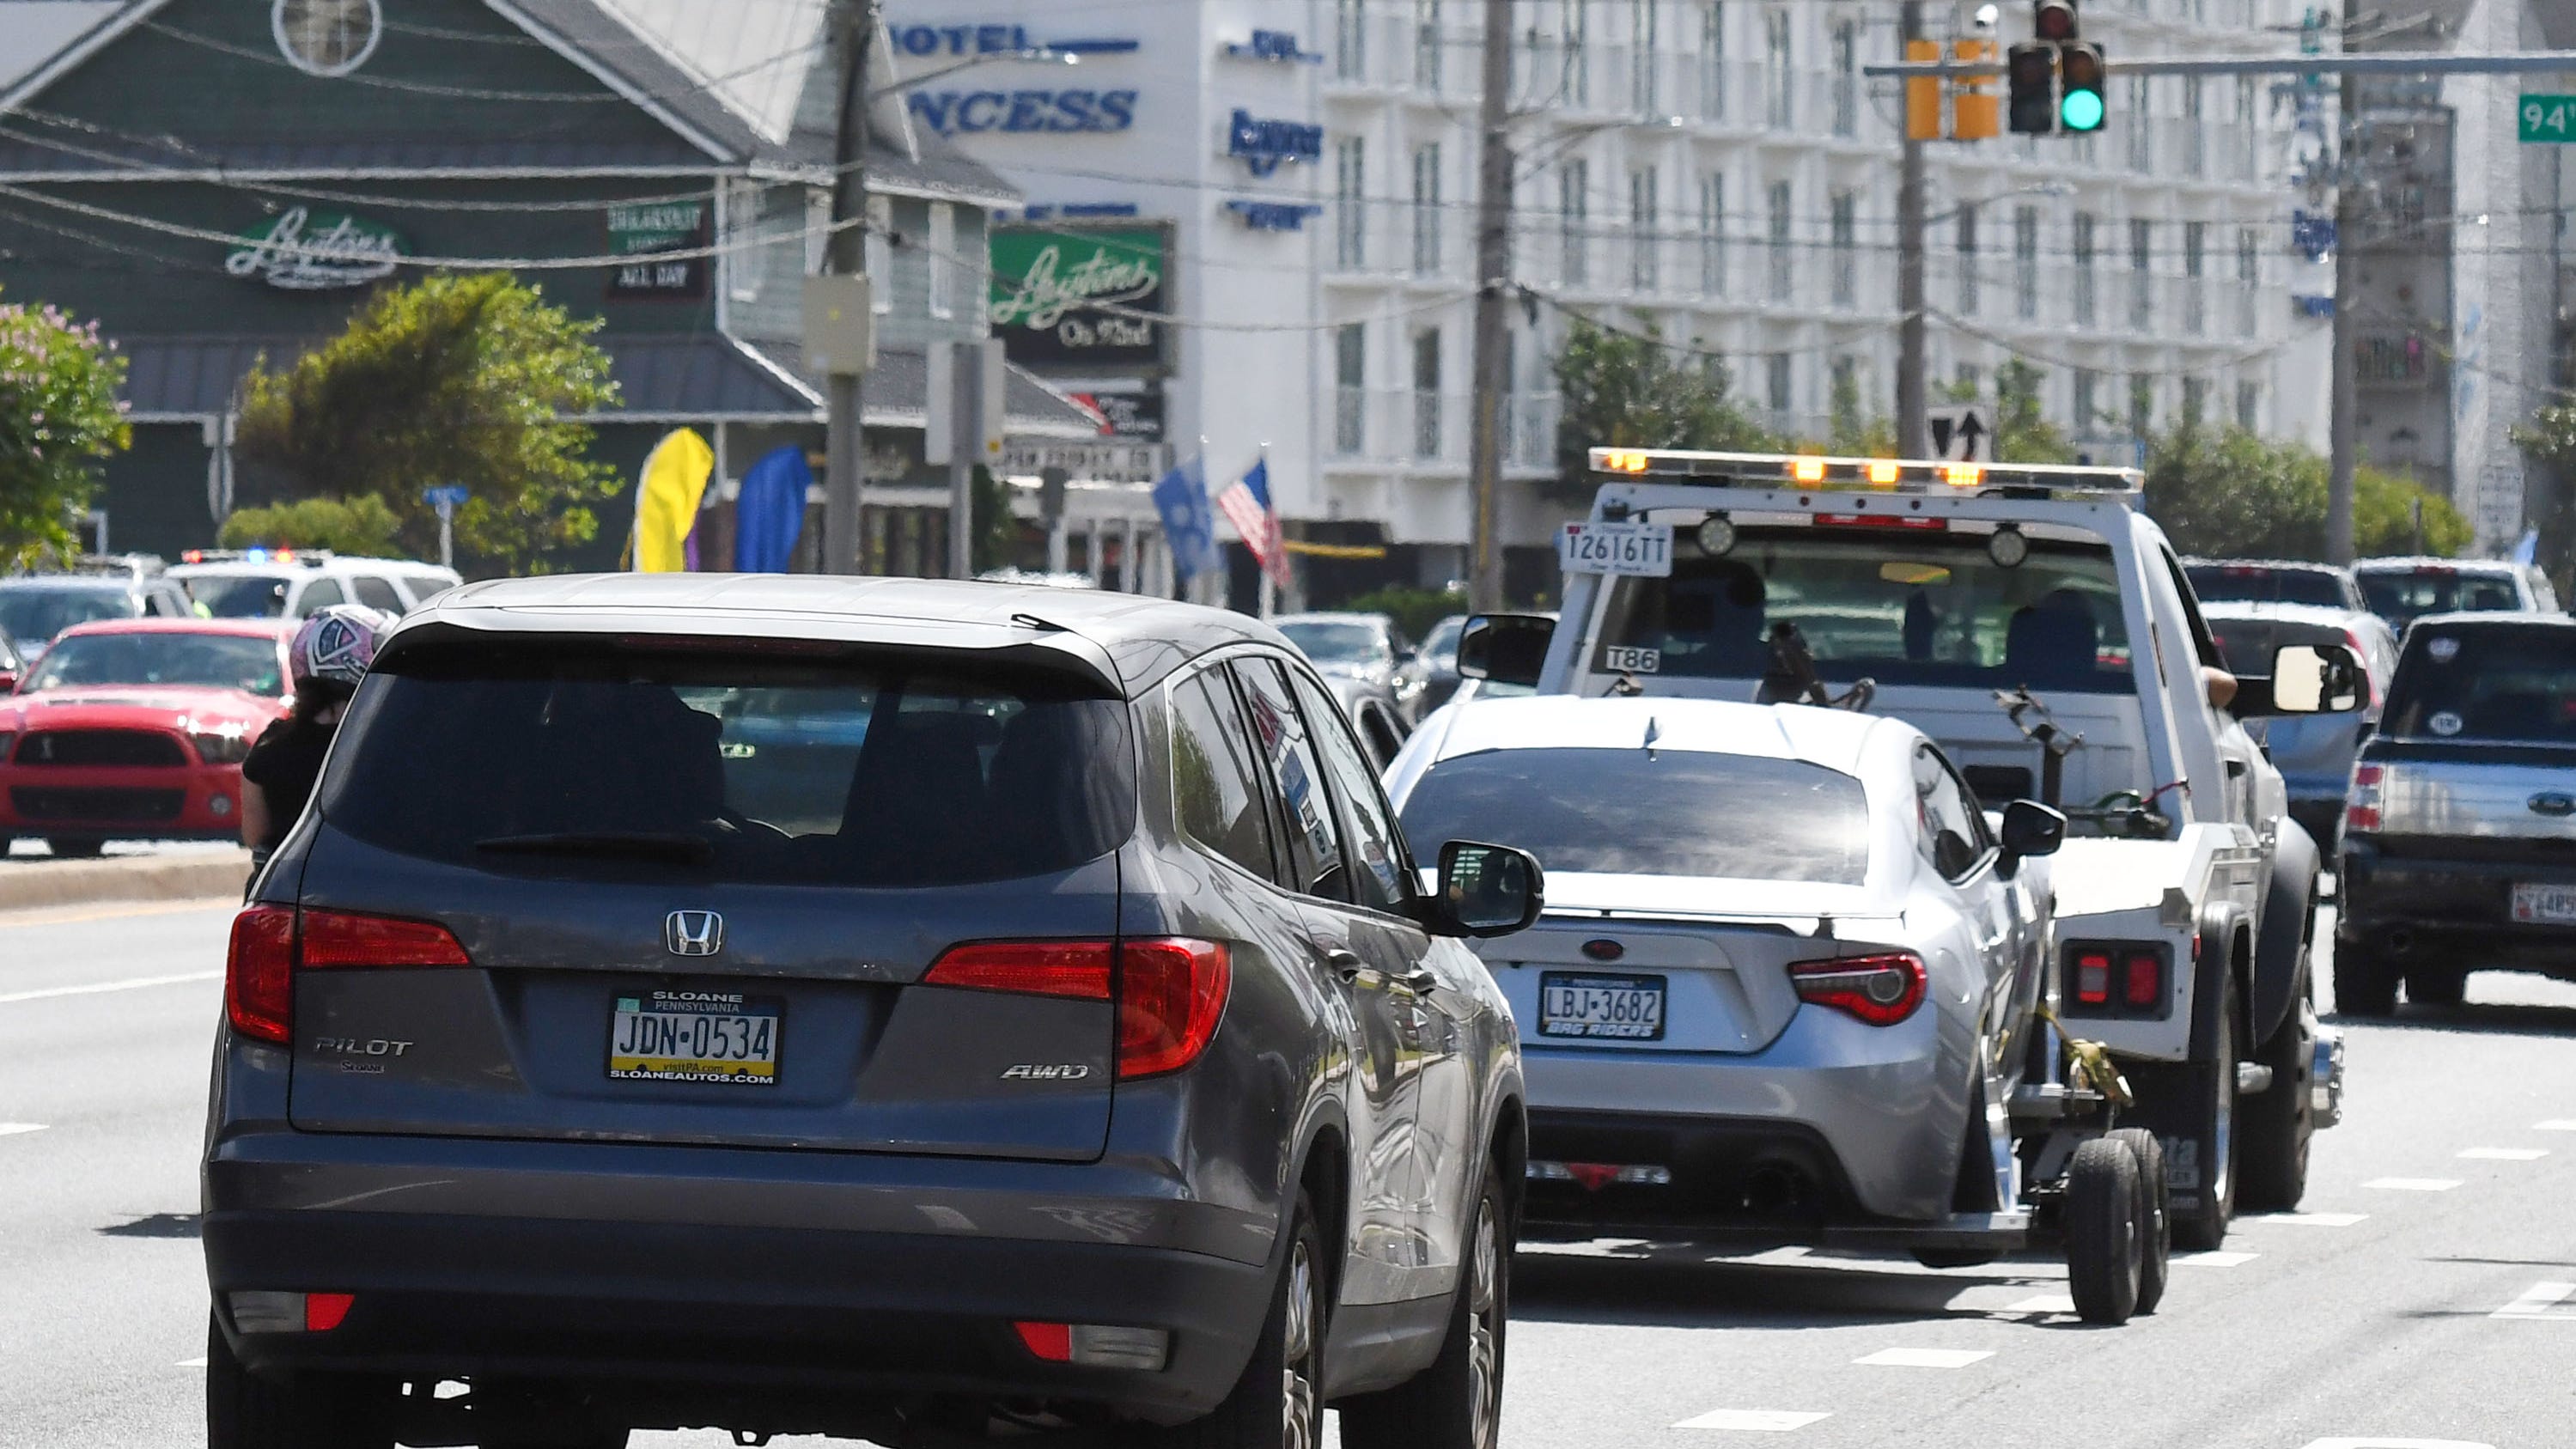 Ocean City, Md. tackles H2oi car rally 2021 with new tactics